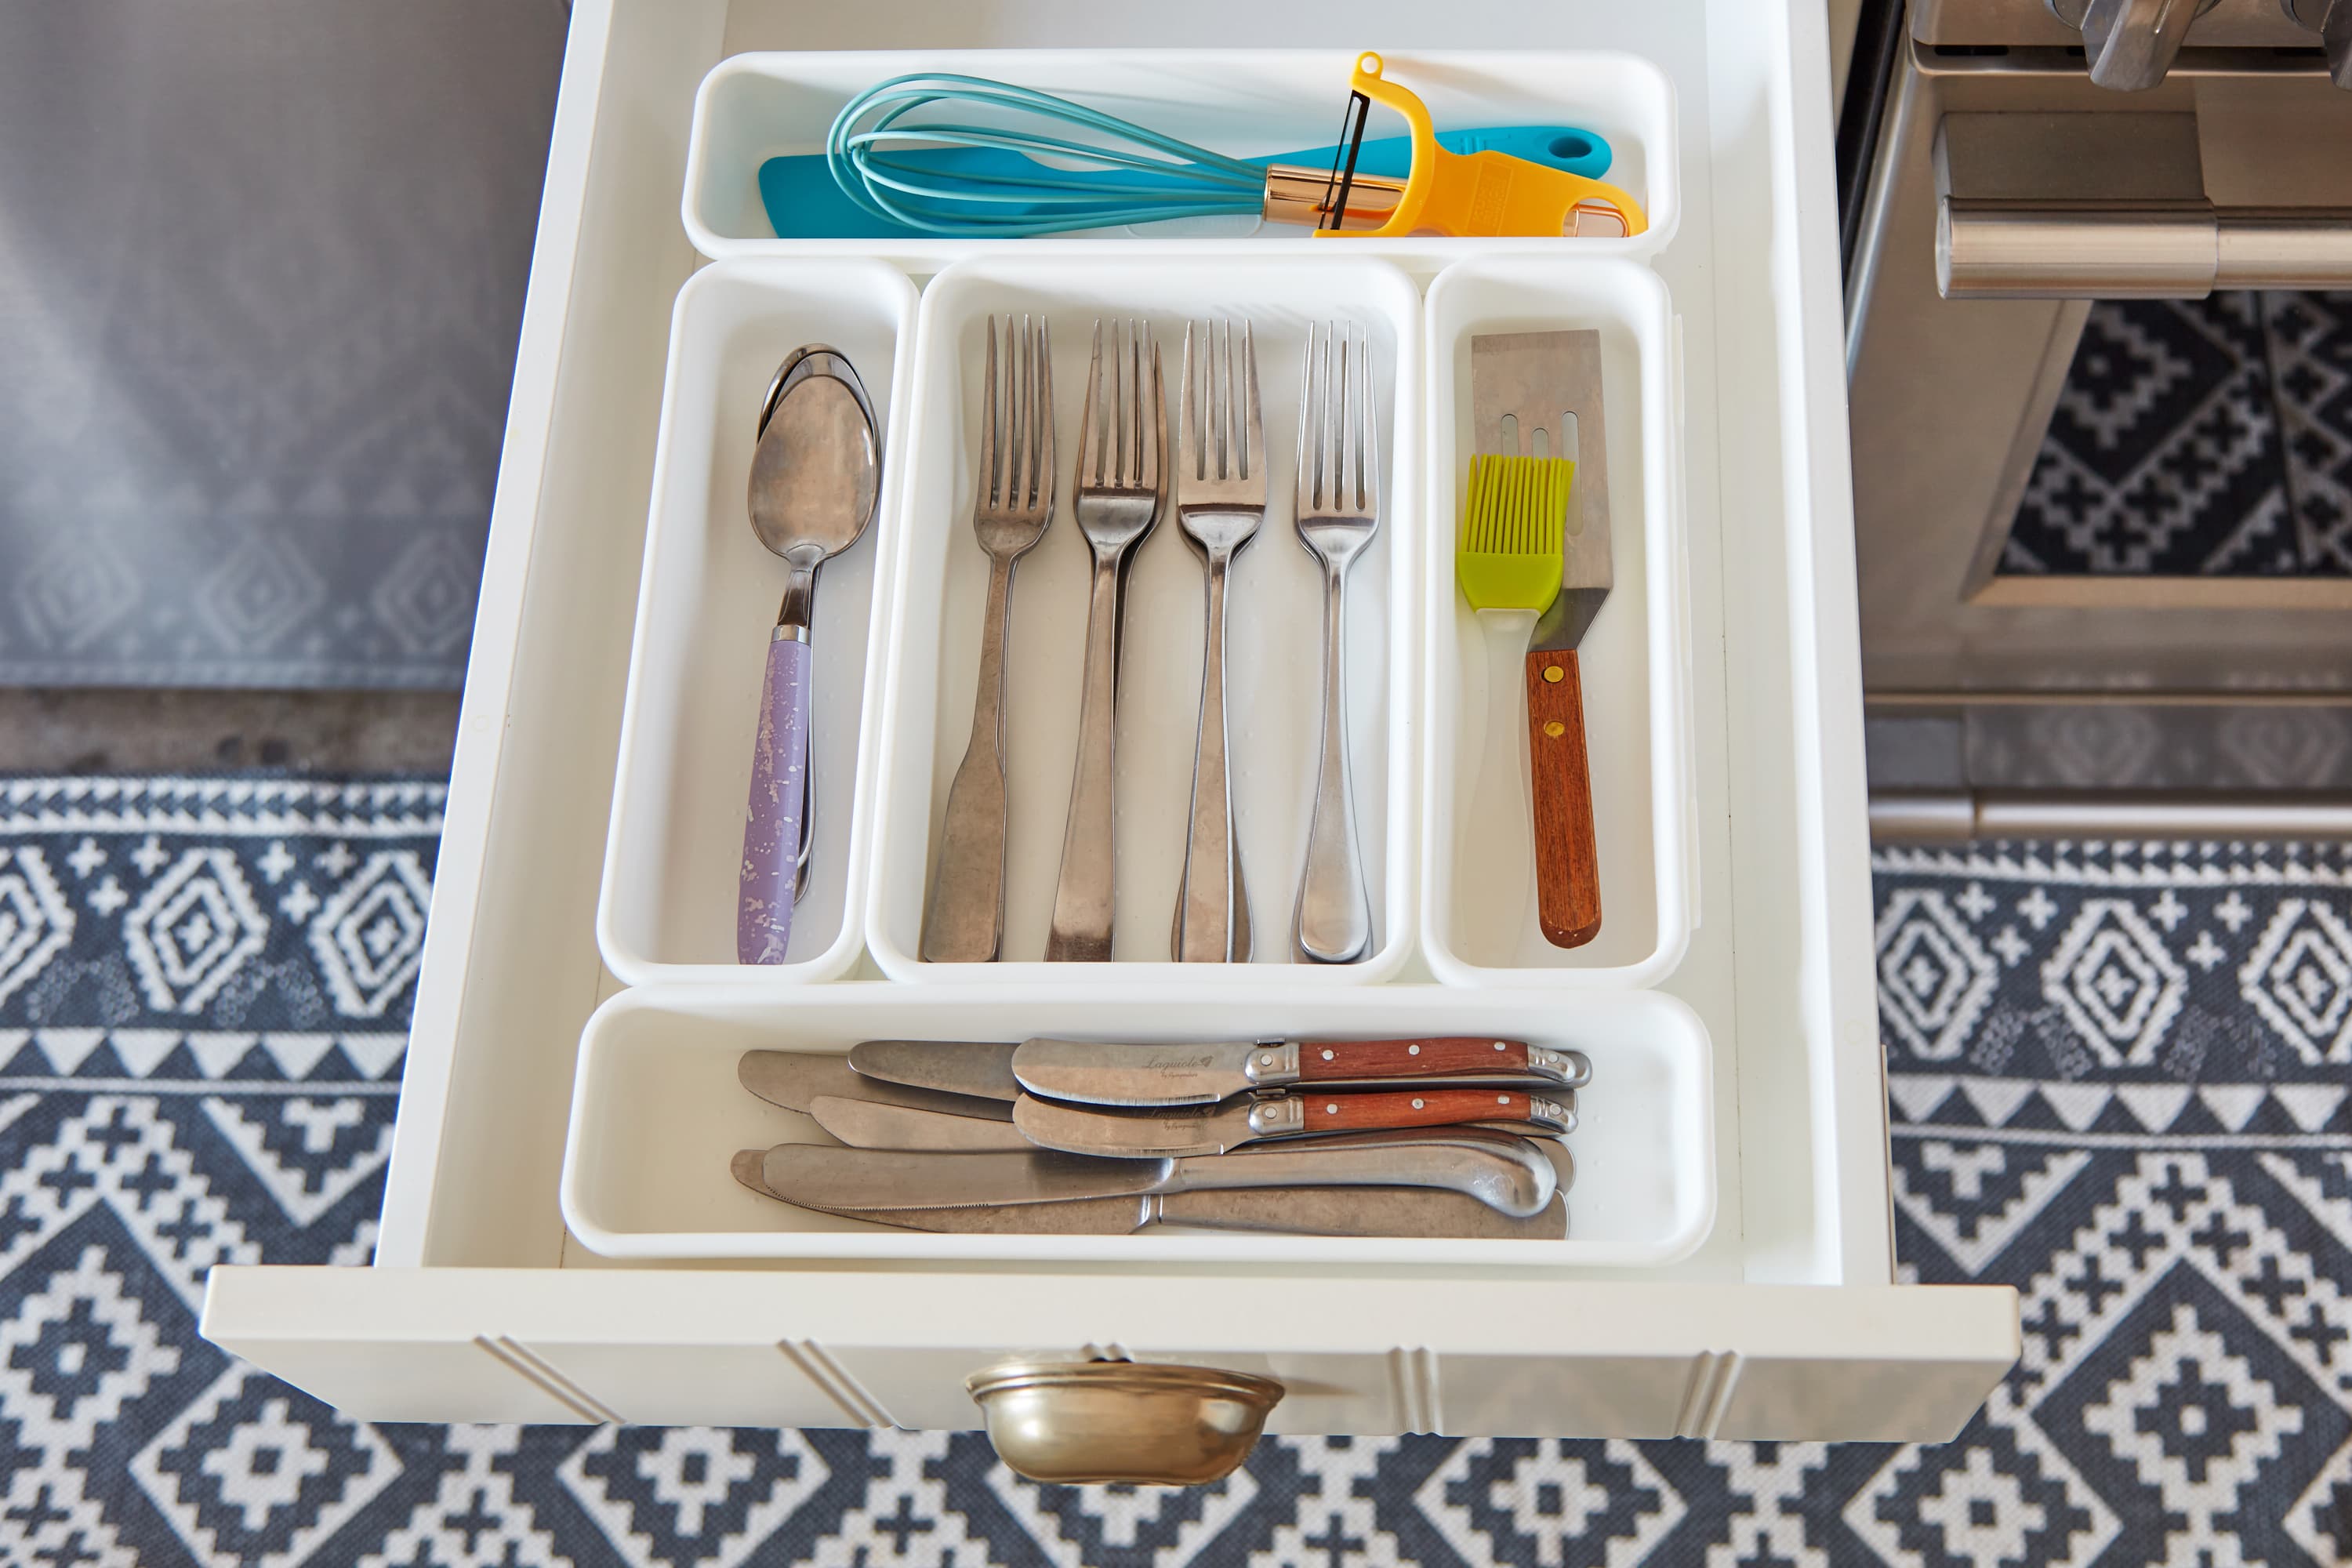 https://cdn.apartmenttherapy.info/image/upload/v1570723372/k/Photo/Lifestyle/2019-10-how-i-fixed-my-most-annoying-silverware-drawer-problem/2019_silverwaredrawer_lead_204.jpg